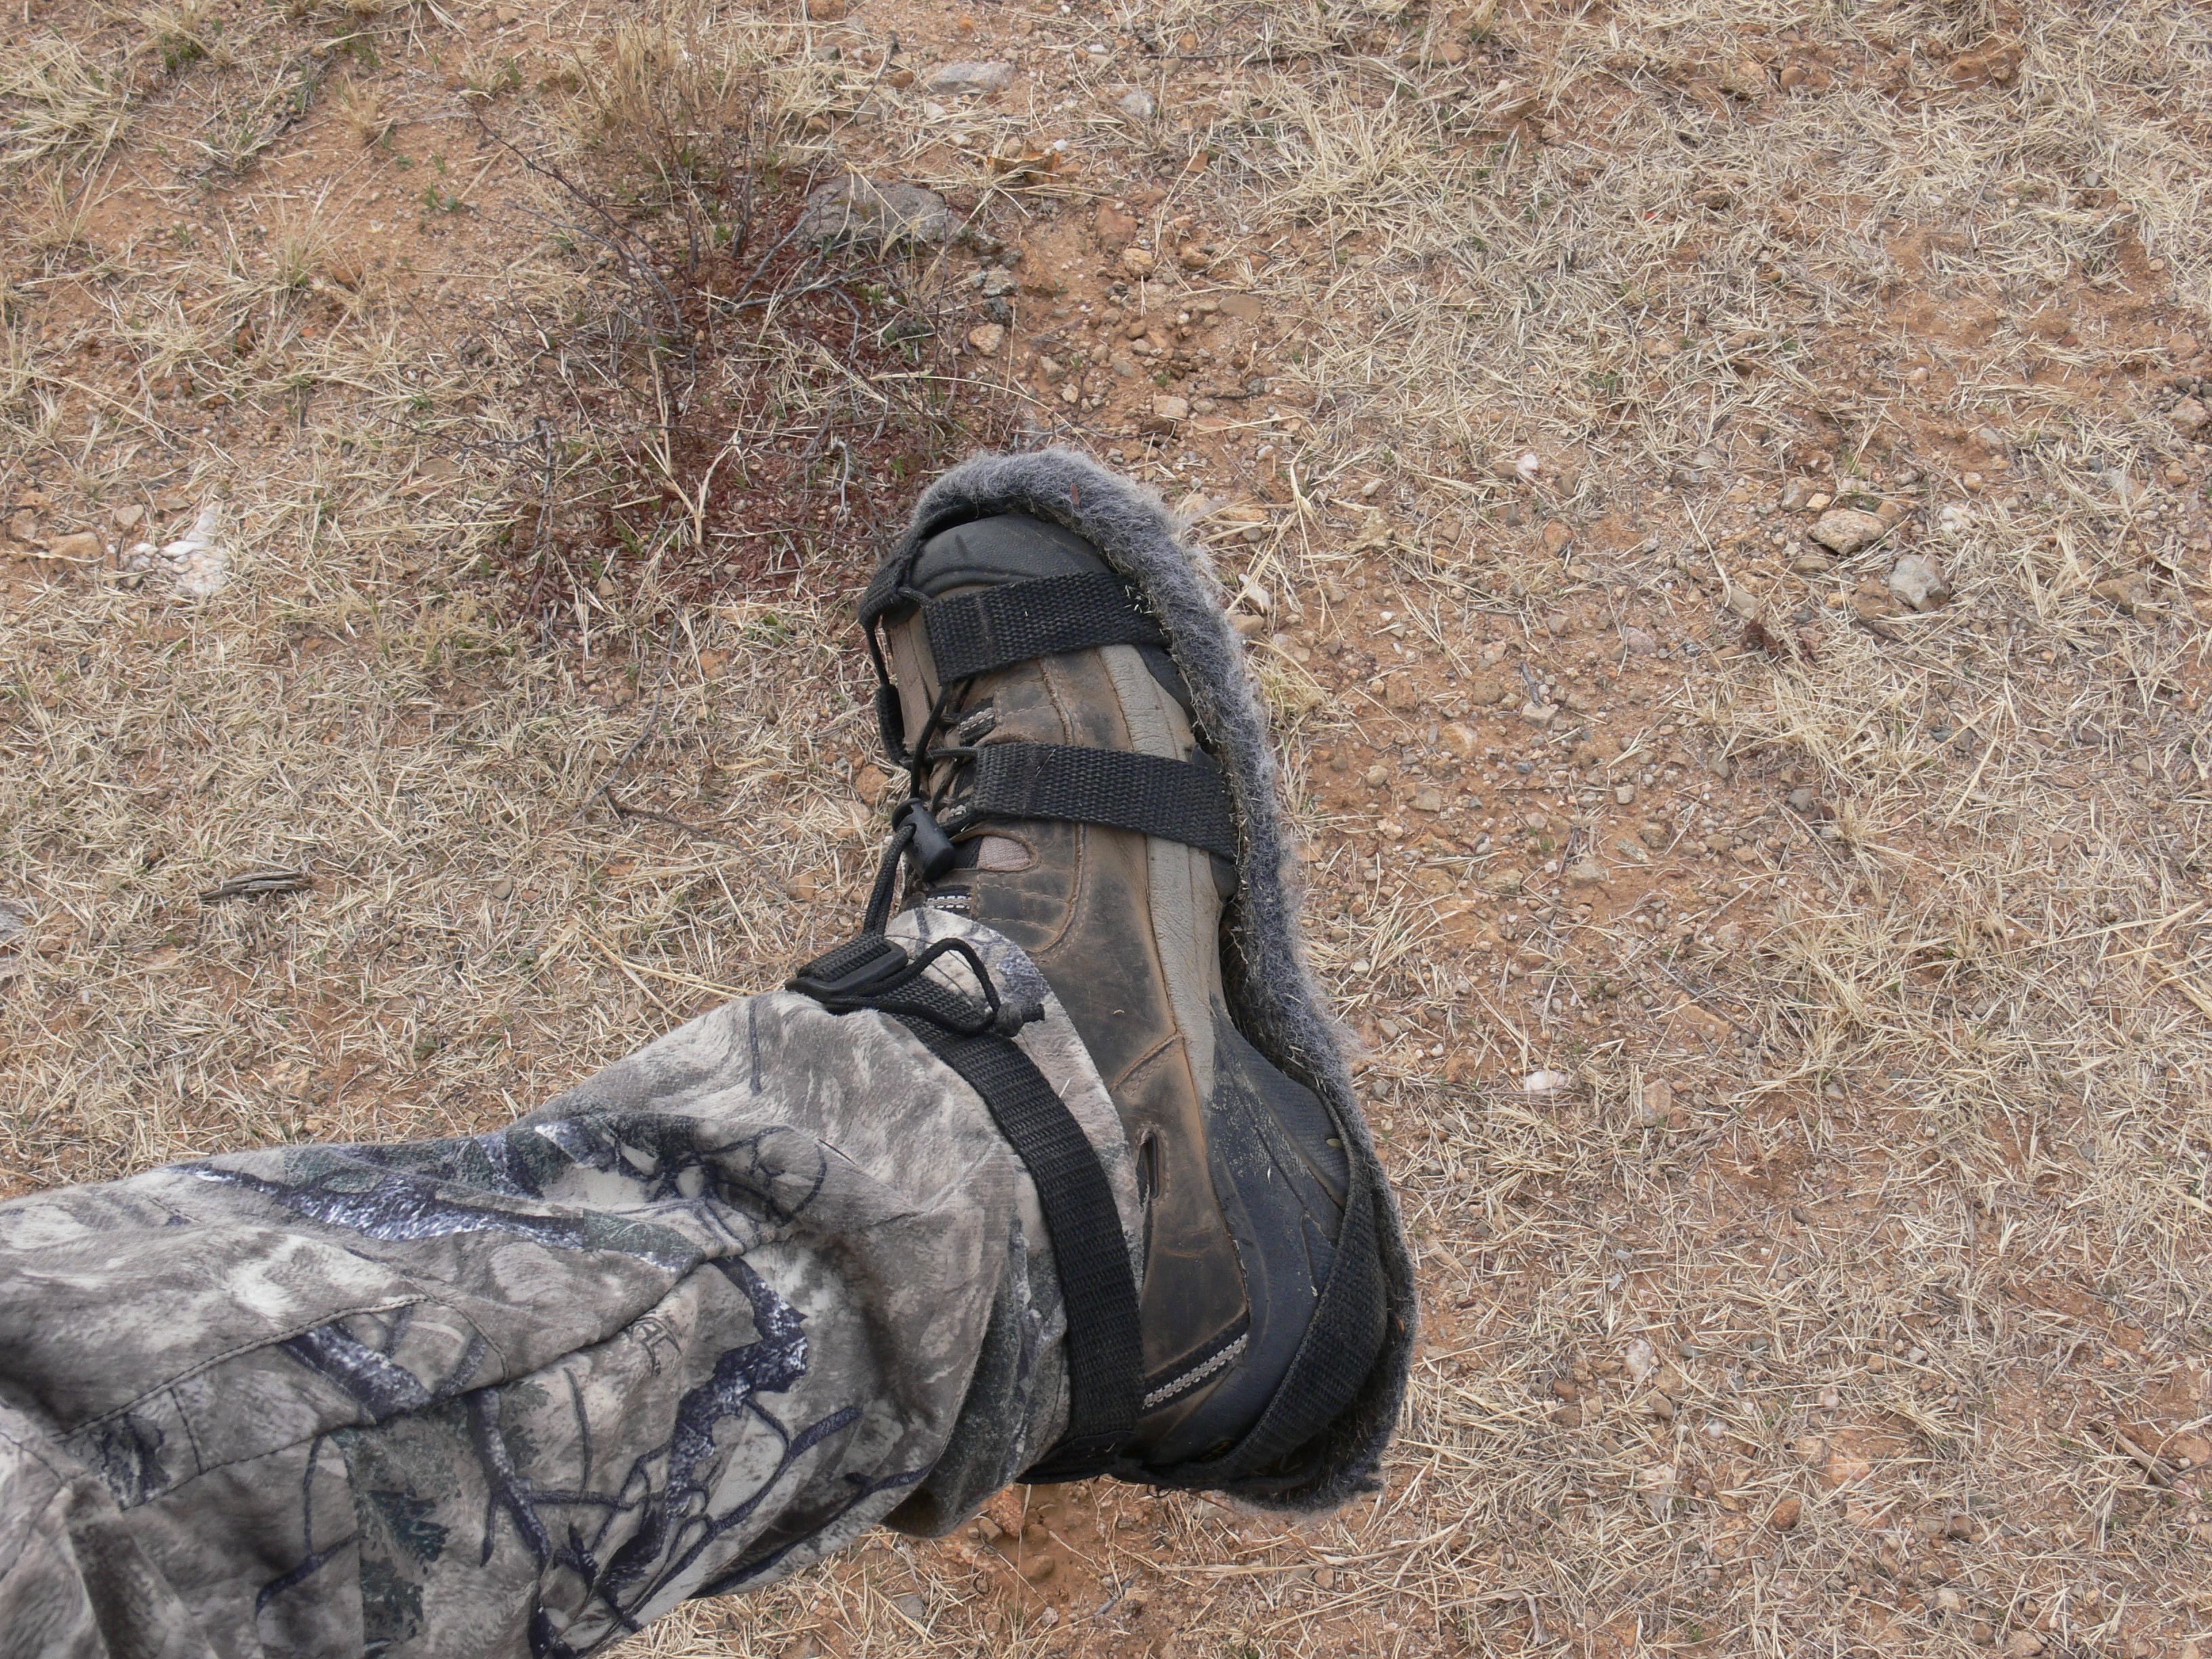 putting a stalking boot on your boots is a bowhunter secret weapon.